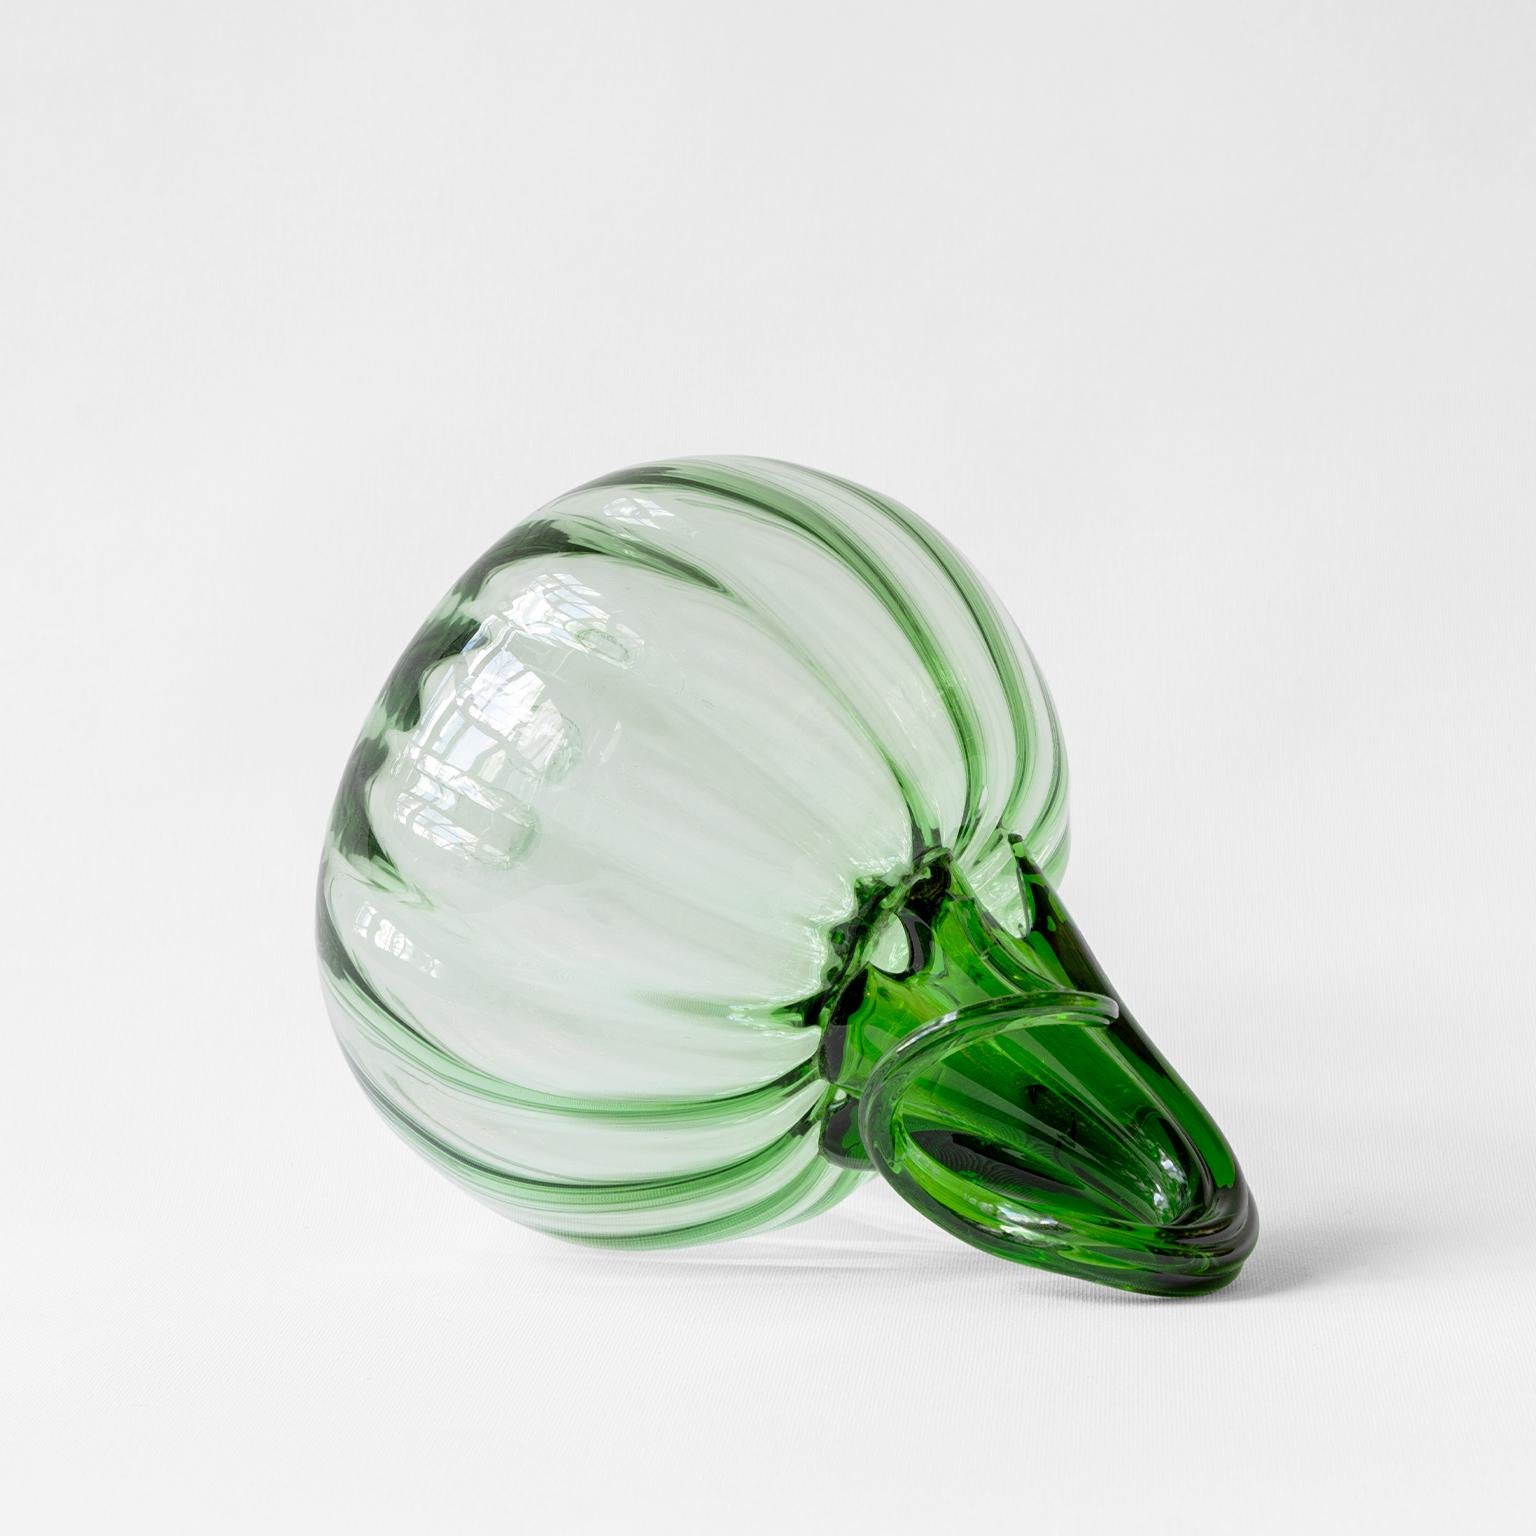 GREEN PUMPKIN, where beautiful colors come together in the form of a pumpkin, is a candidate to add color to your home!
-Made from hand blown glass
-A unique hand made decorative object
-Designed by experienced glass blowers in a pumpkin